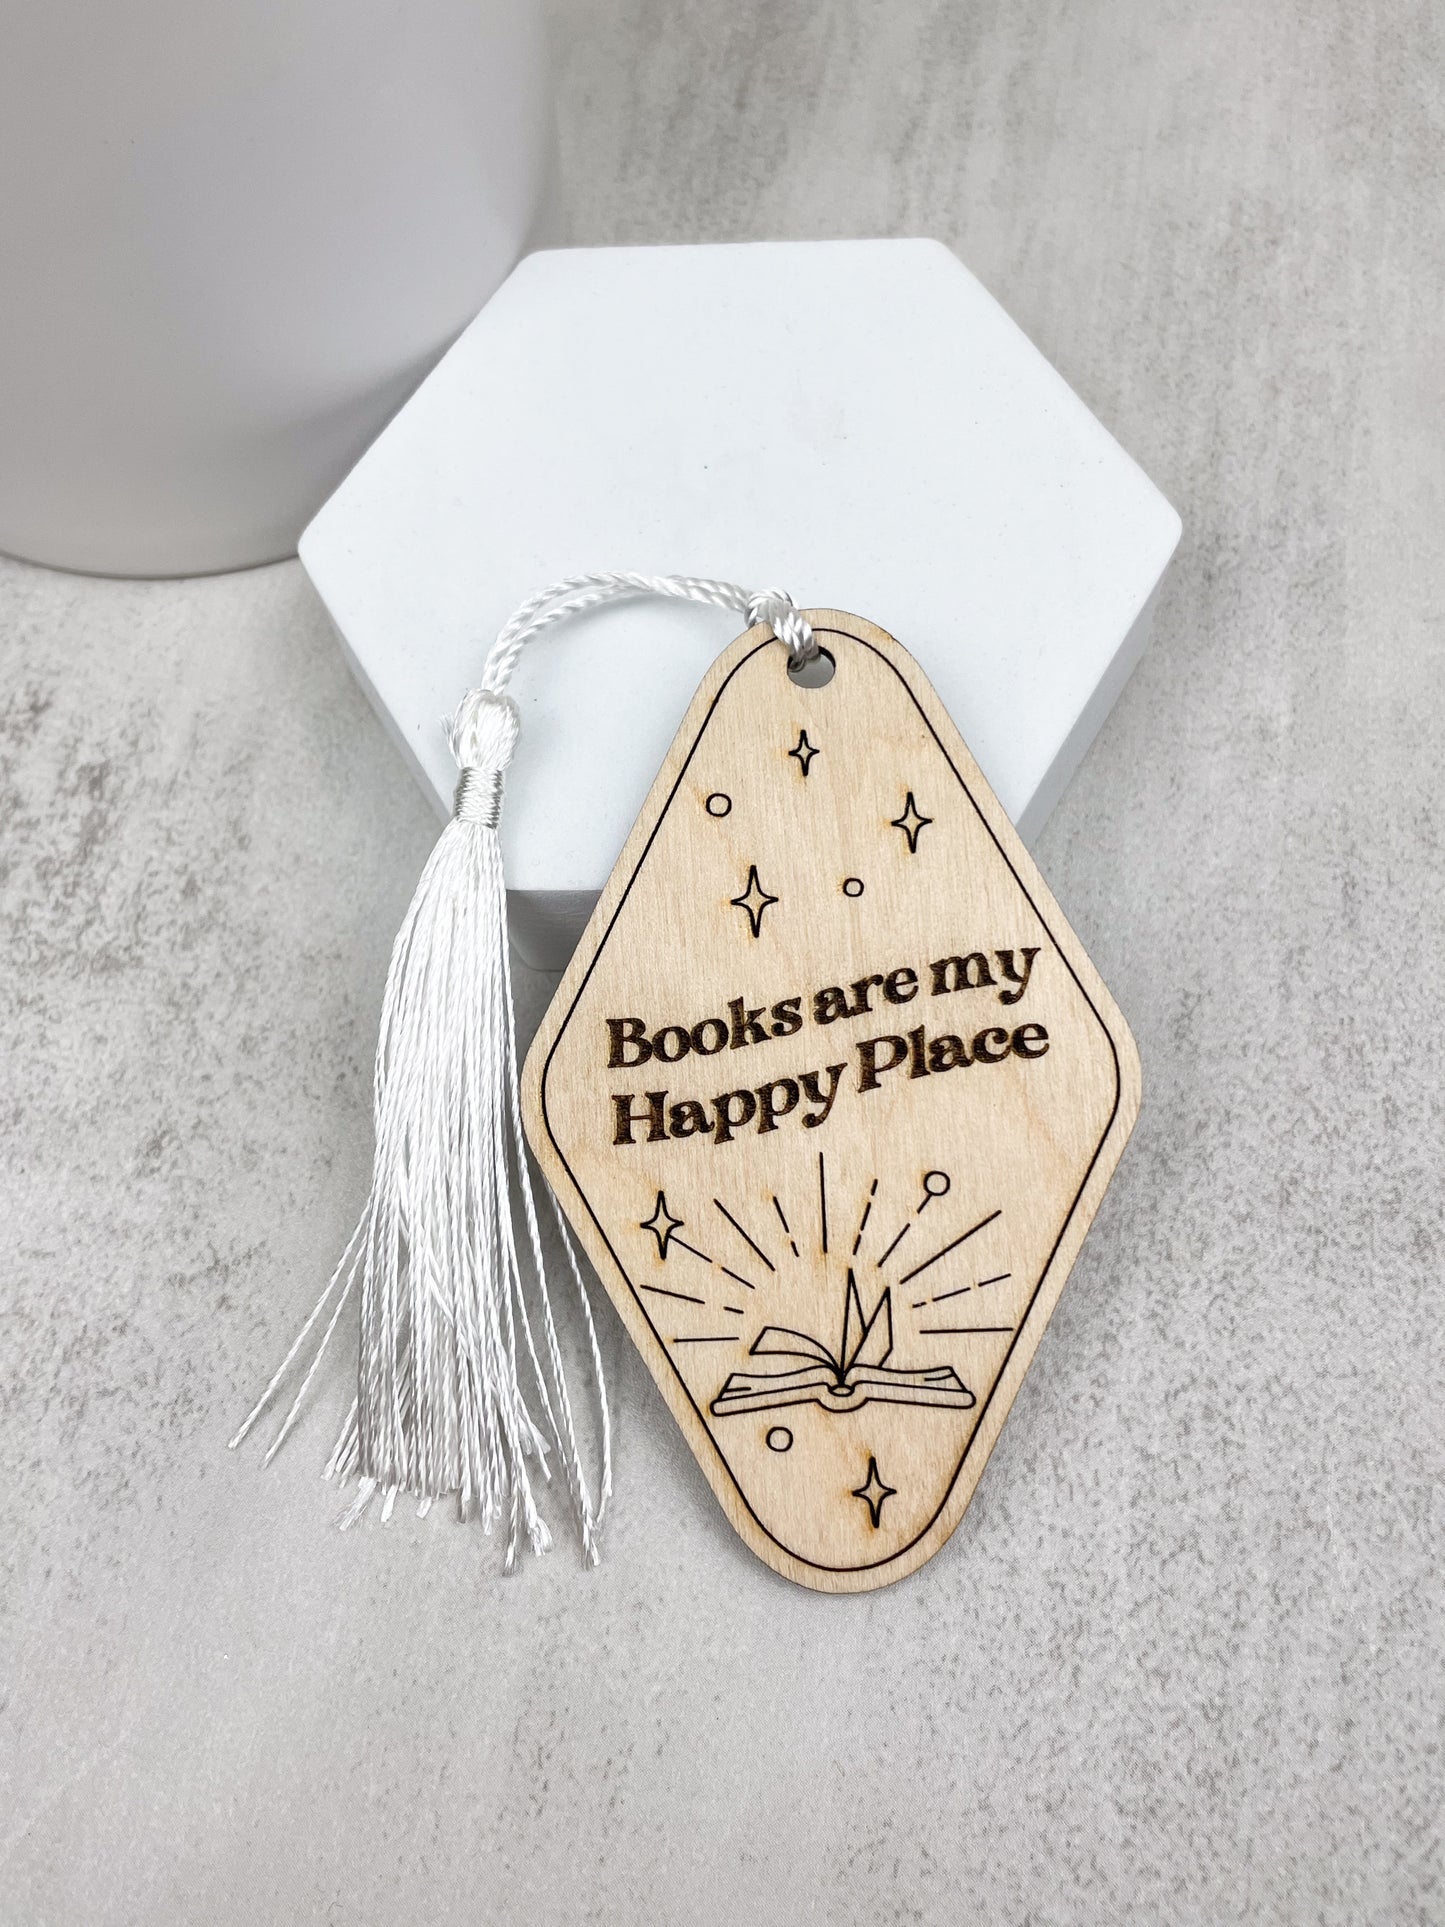 Wooden Bookmarks: Books are my happy place